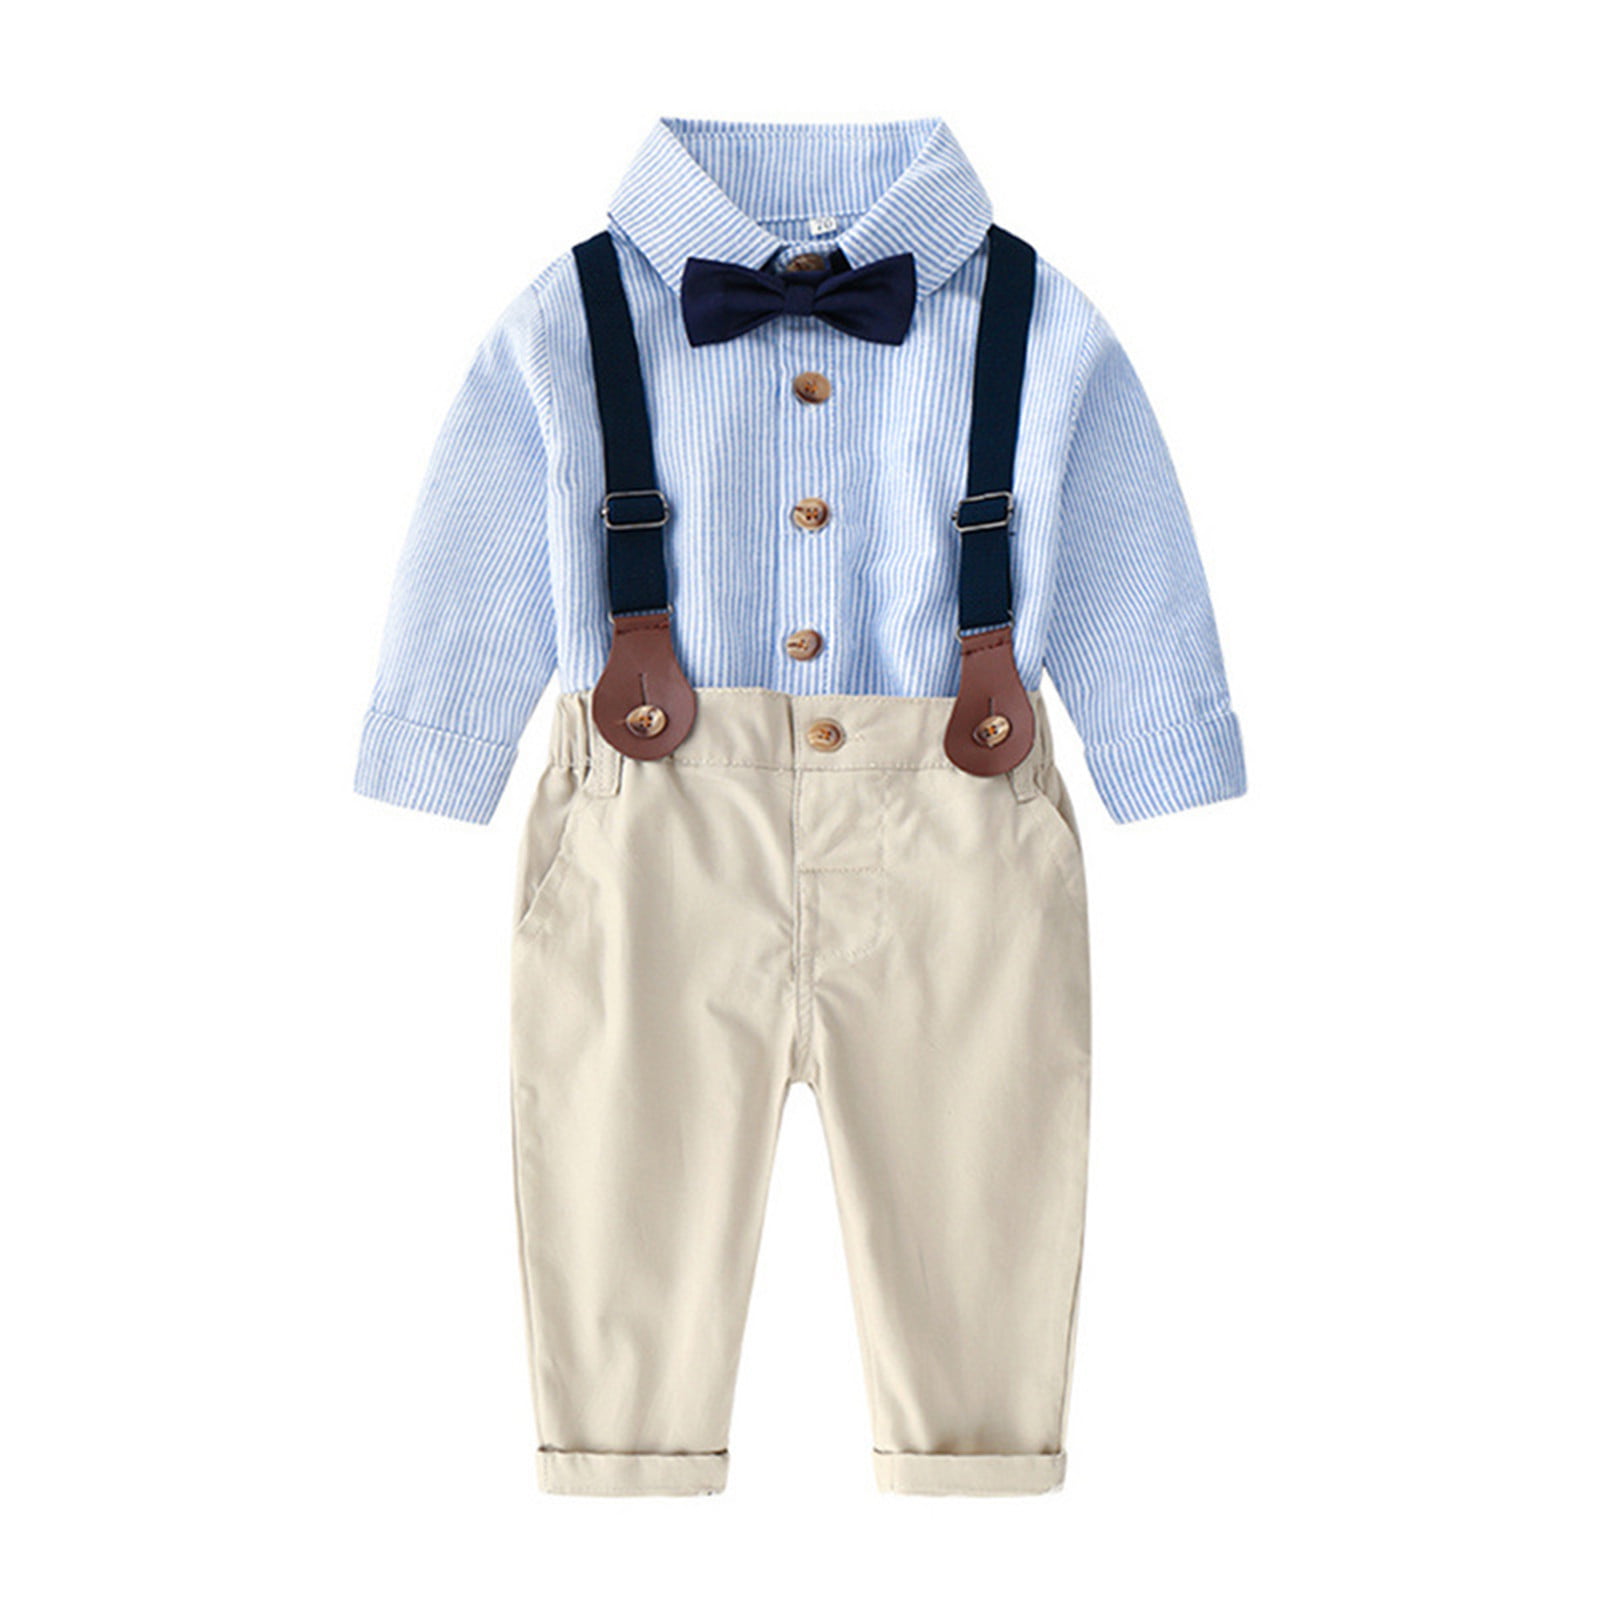 ZXHACSJ Toddler Baby Boys Gentleman Bow Tie Solid T-Shirt Tops+Suspender  Pants Outfits Light Blue 80